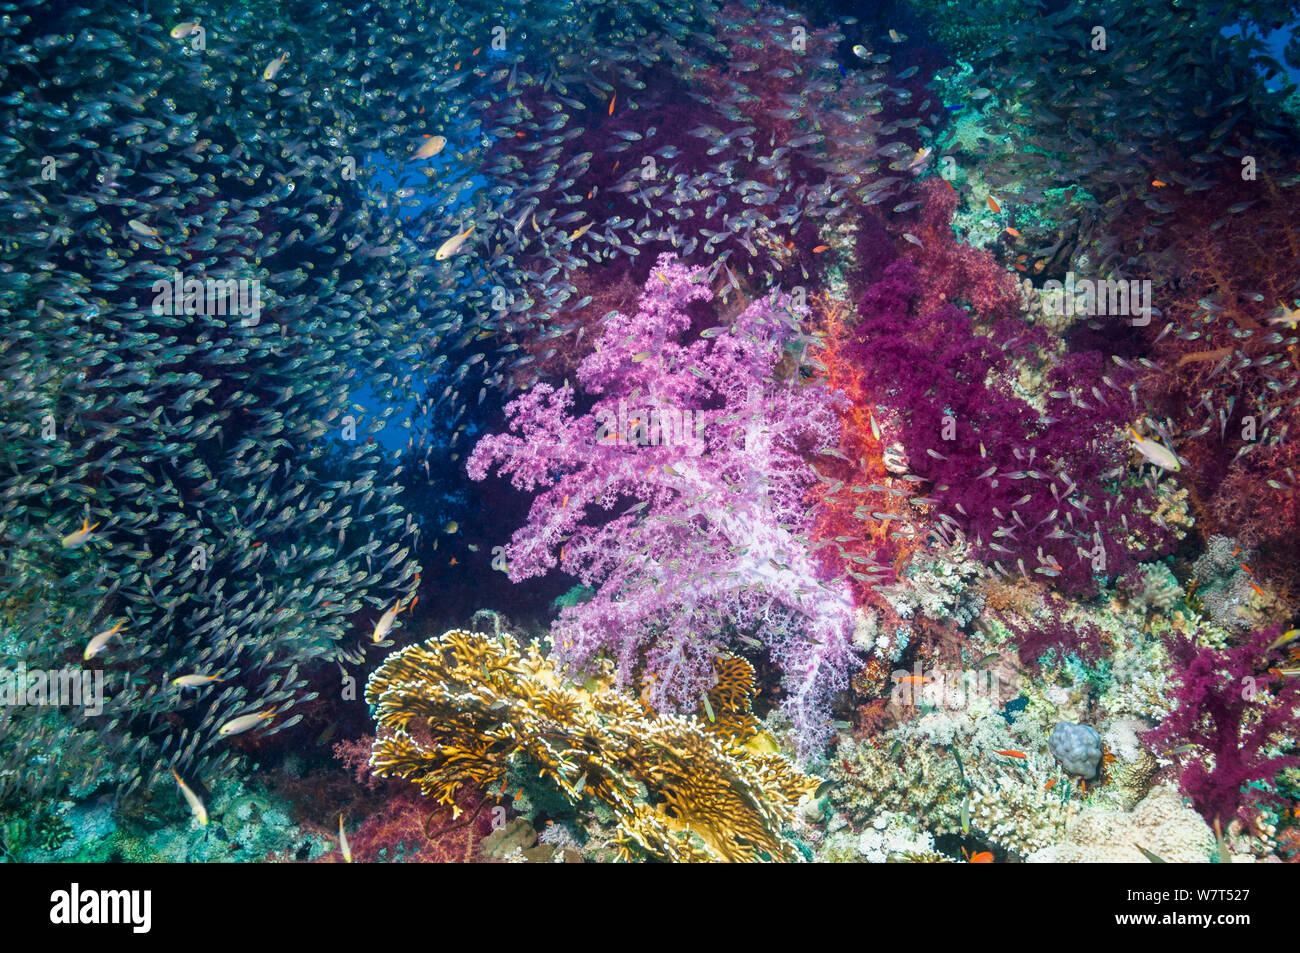 Coral reef scenery with Pygmy sweepers (Parapriacanthus guentheri) and soft corals (Dendronephthya sp) Egypt, Red Sea. Stock Photo